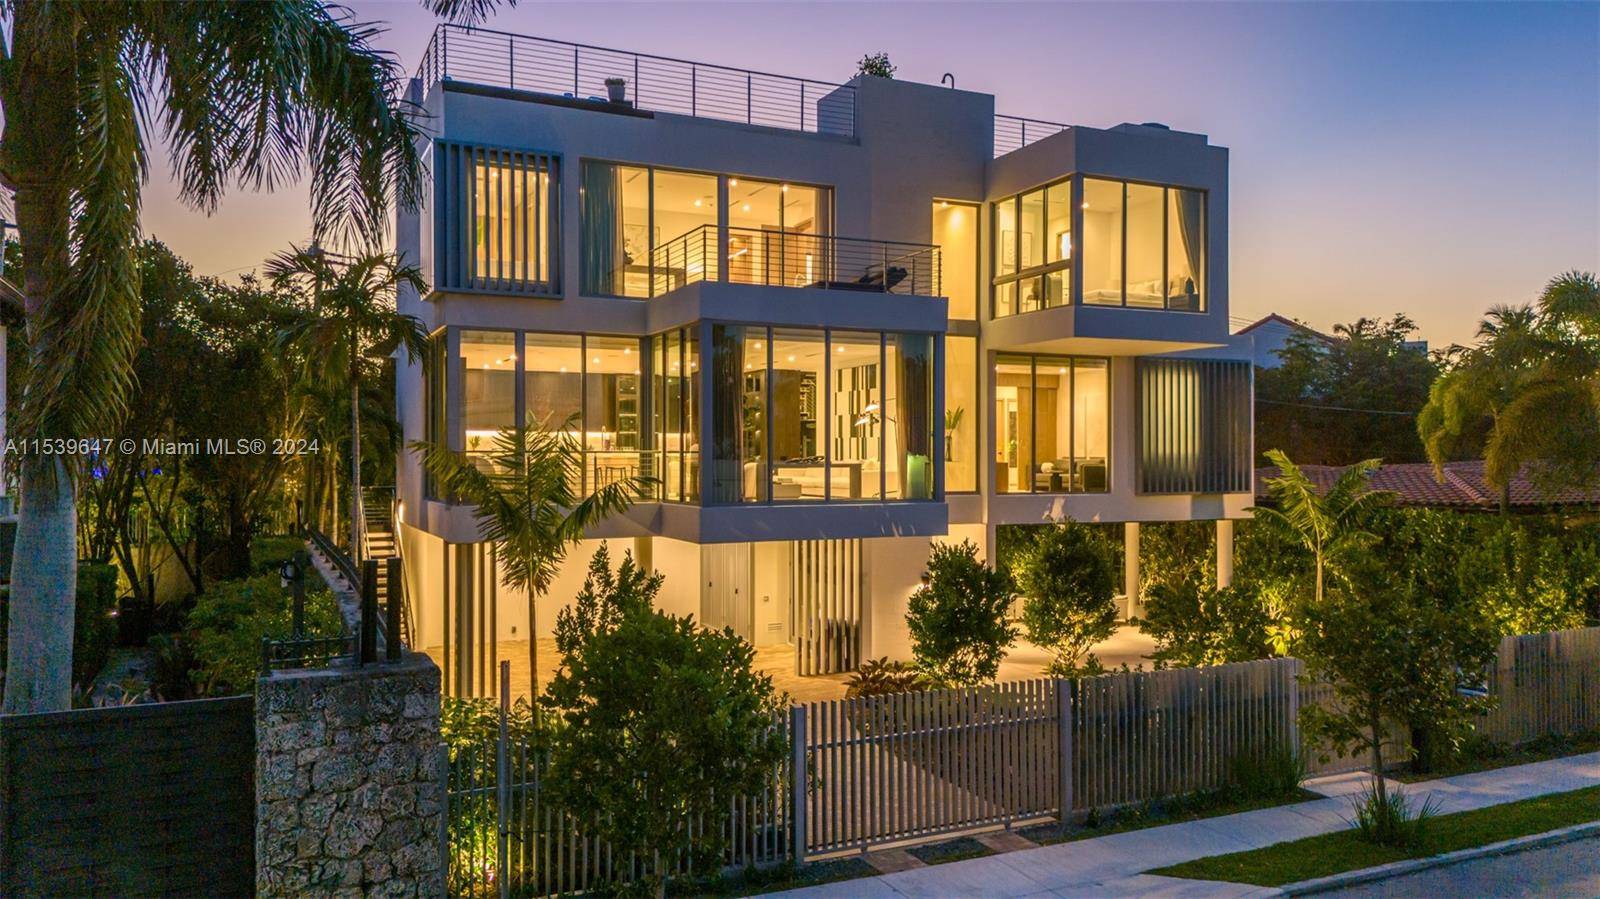 Introducing this Magnificent tri level, New Construction Residence, equipped with a Private Elevator, boasting 6, 625SF of Entertaining Living Space, nestled on the cul de sac of Crystal View Ct ...